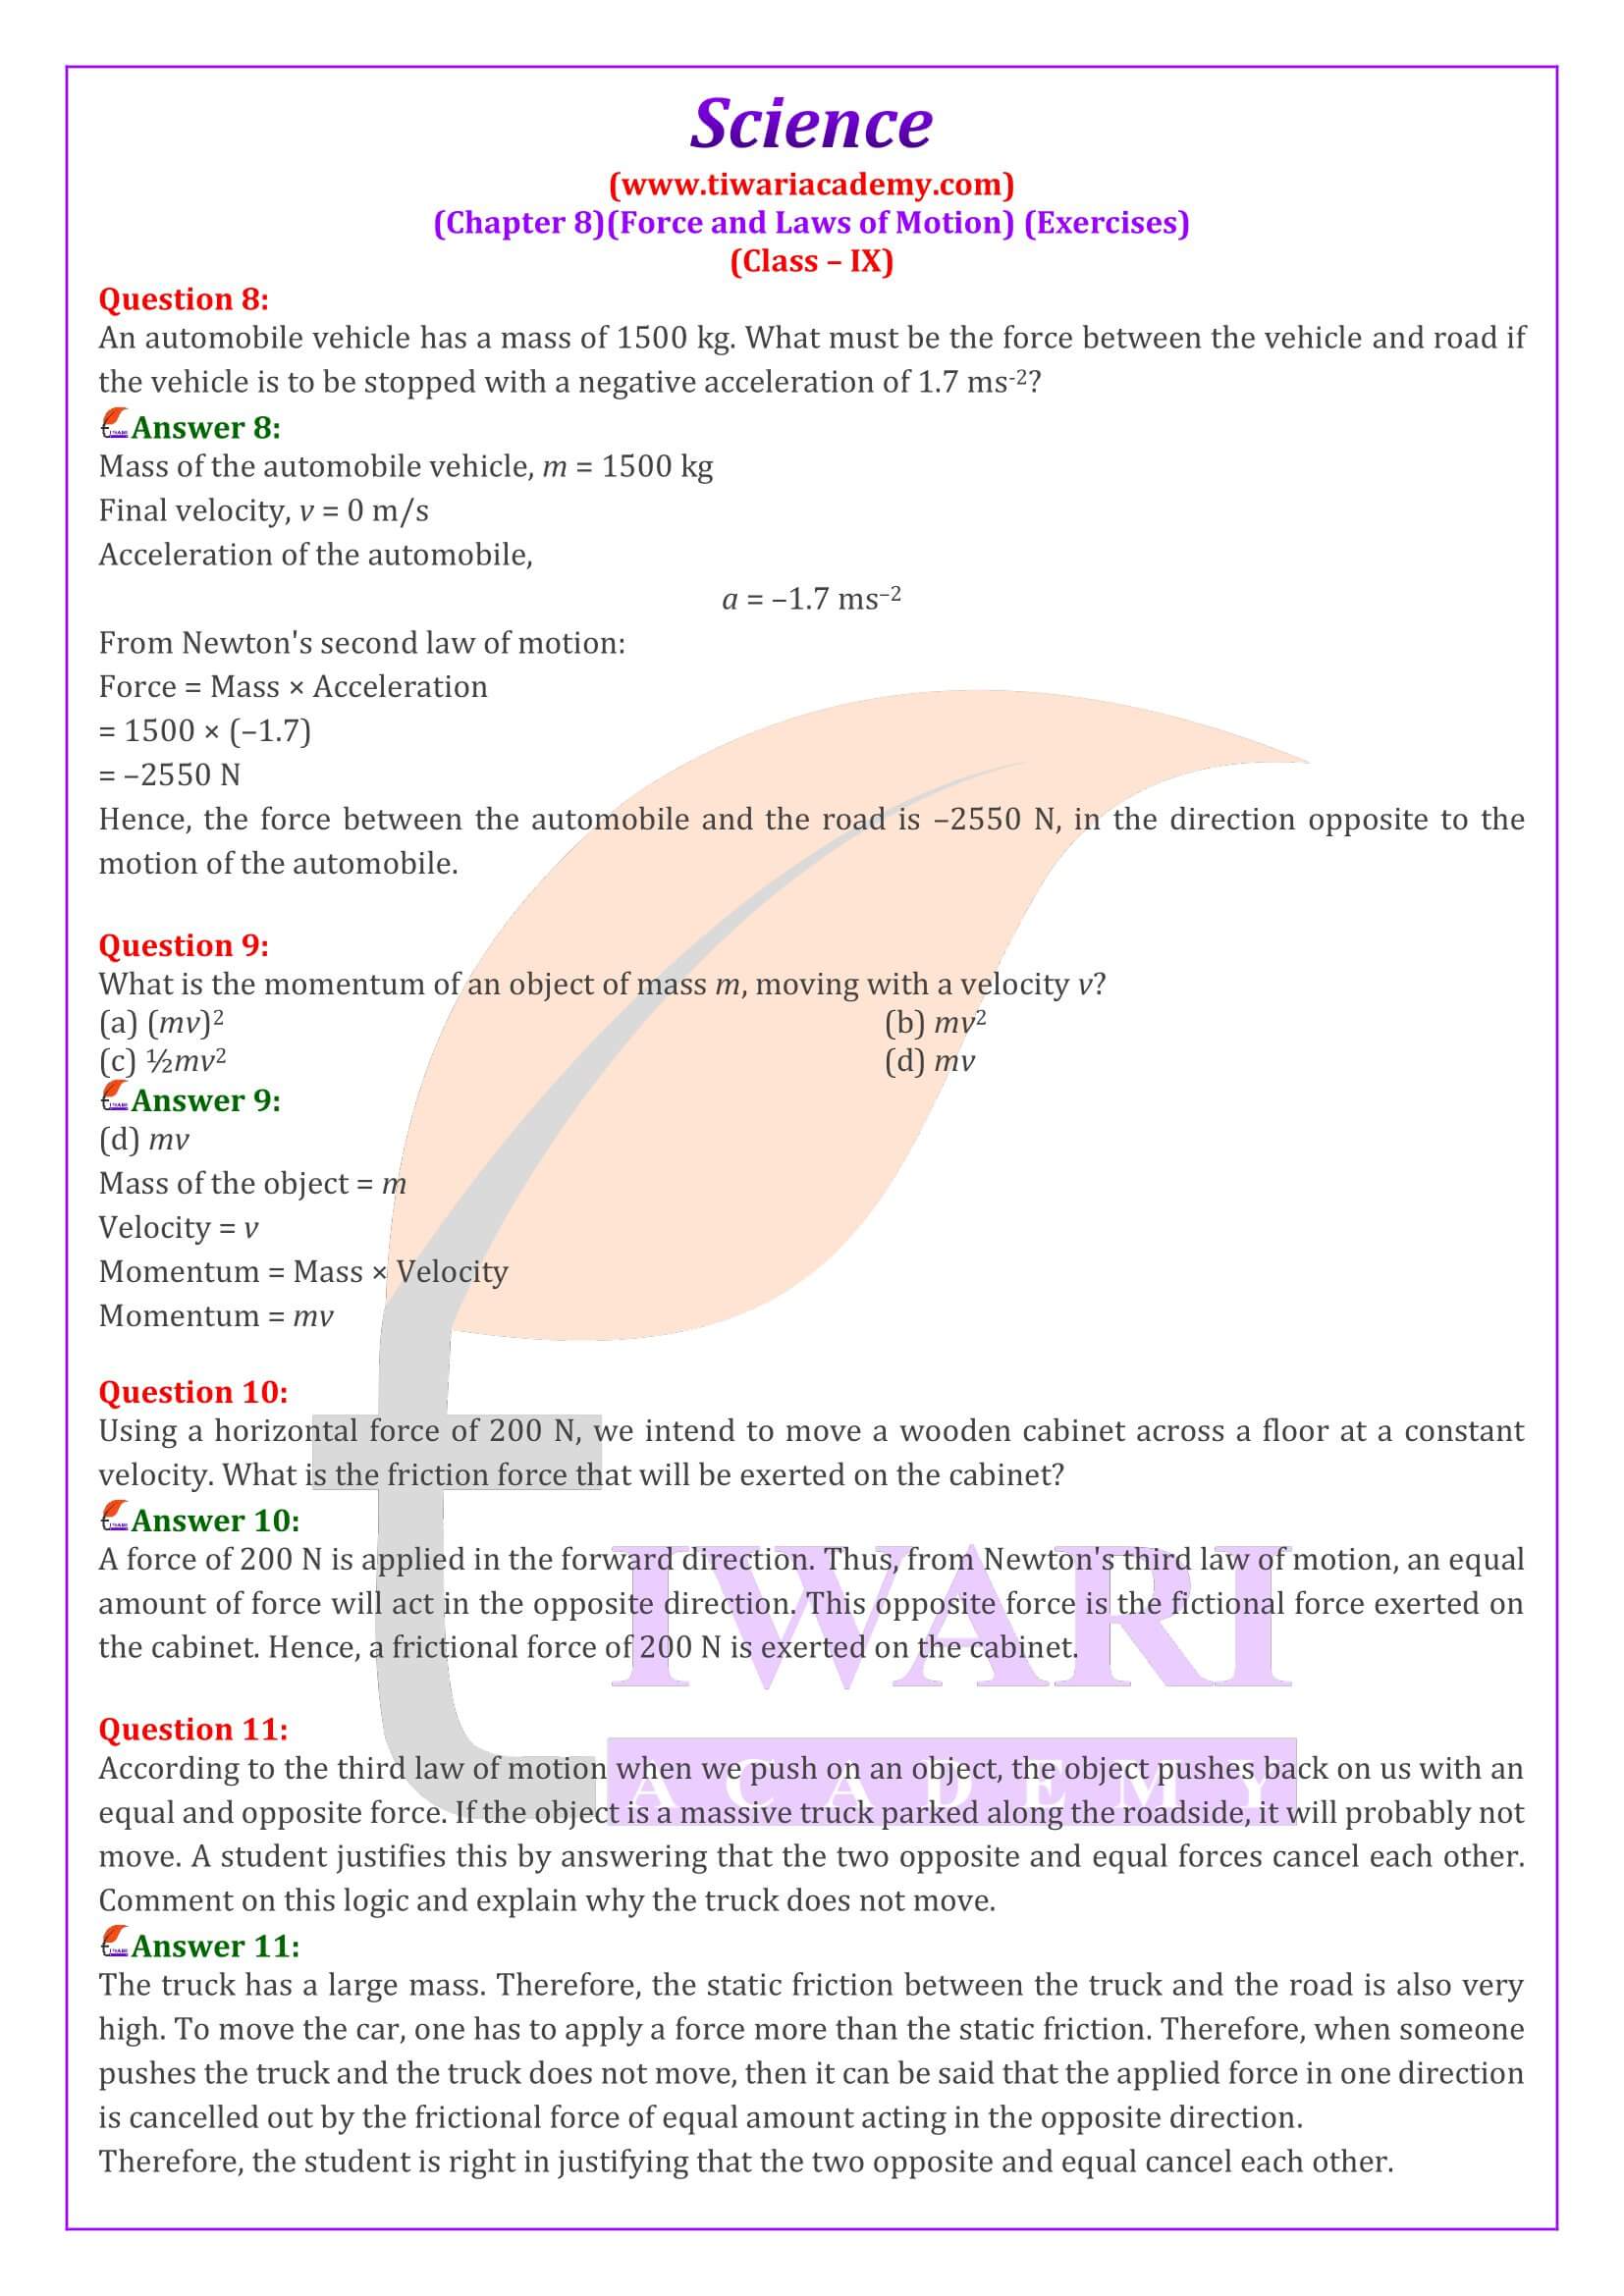 NCERT Solutions for Class 9 Science Chapter 8 Exercises